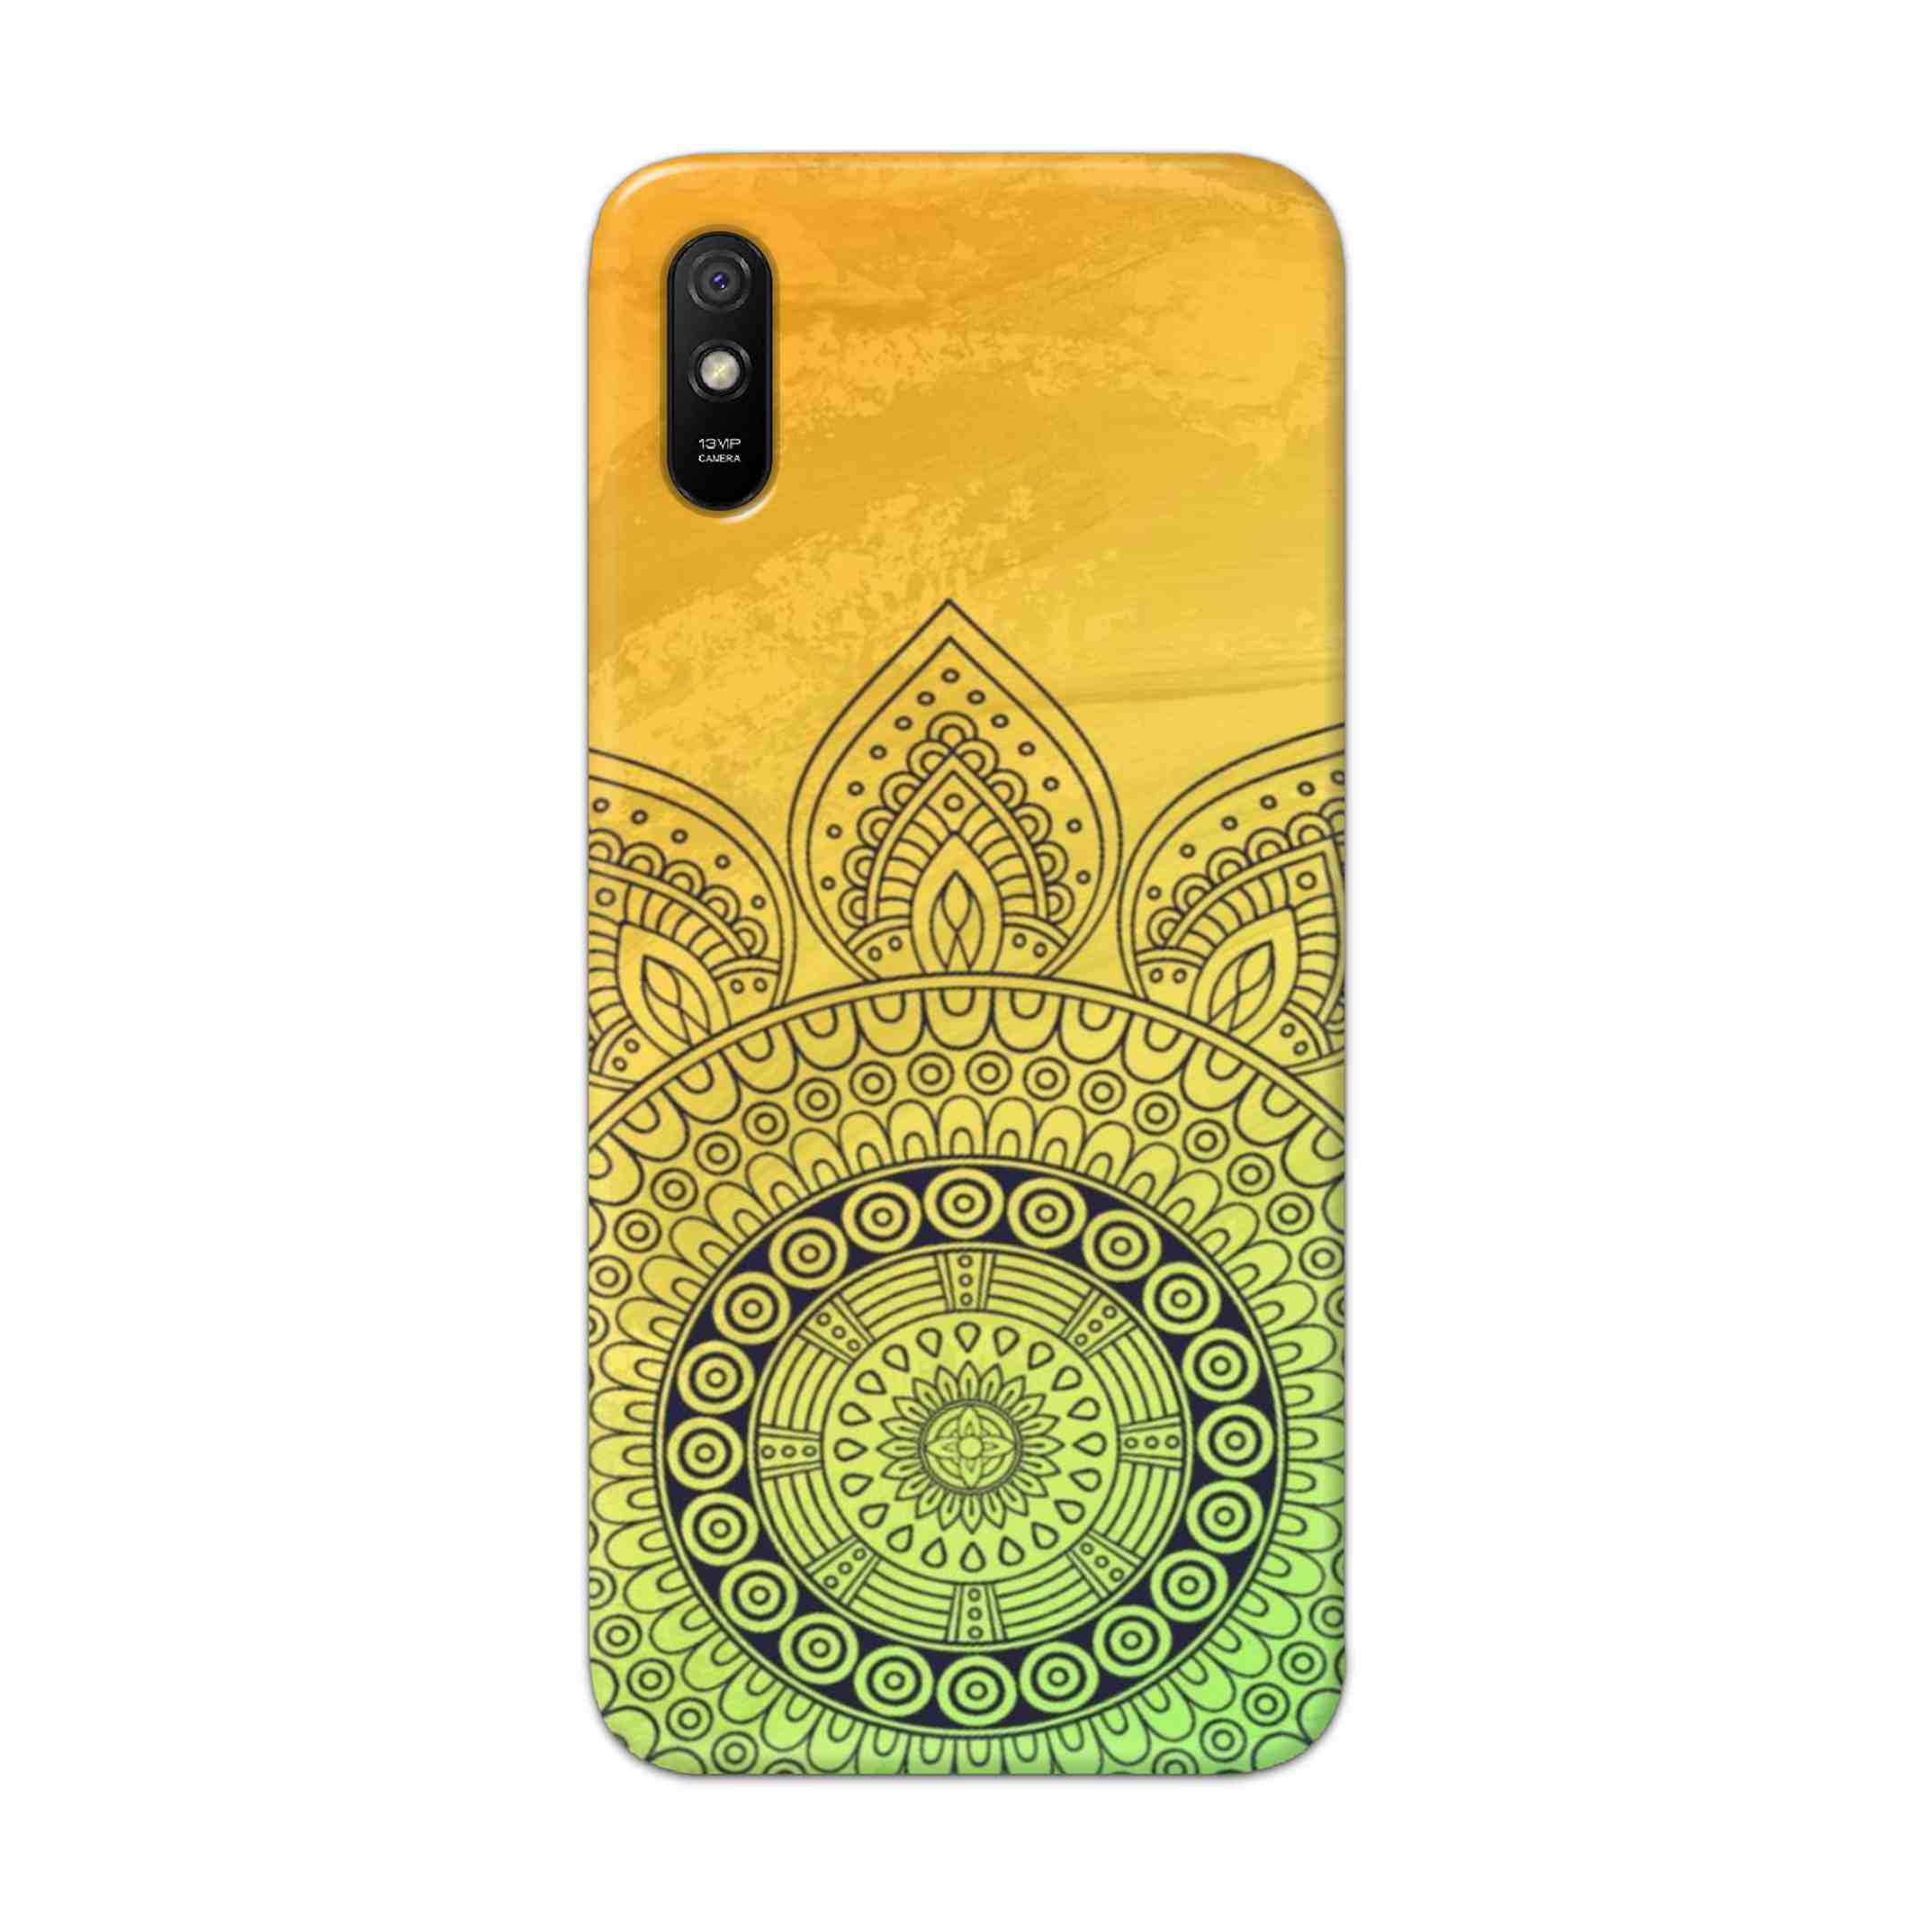 Buy Yellow Rangoli Hard Back Mobile Phone Case Cover For Redmi 9A Online